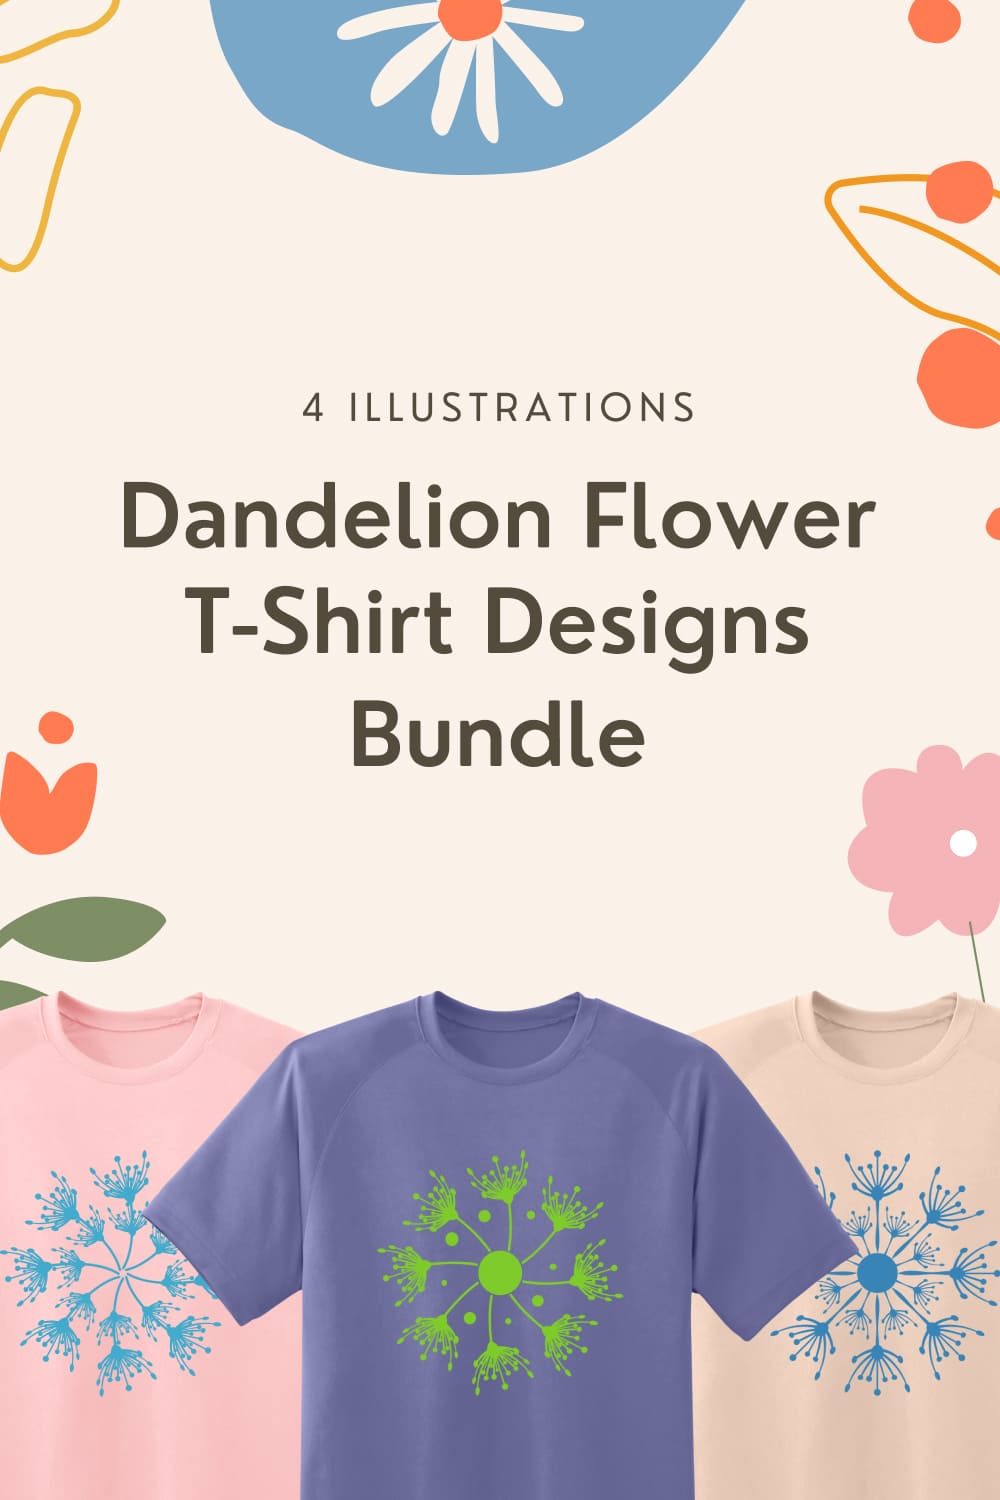 Collection images of t-shirts with irresistible dandelion prints.